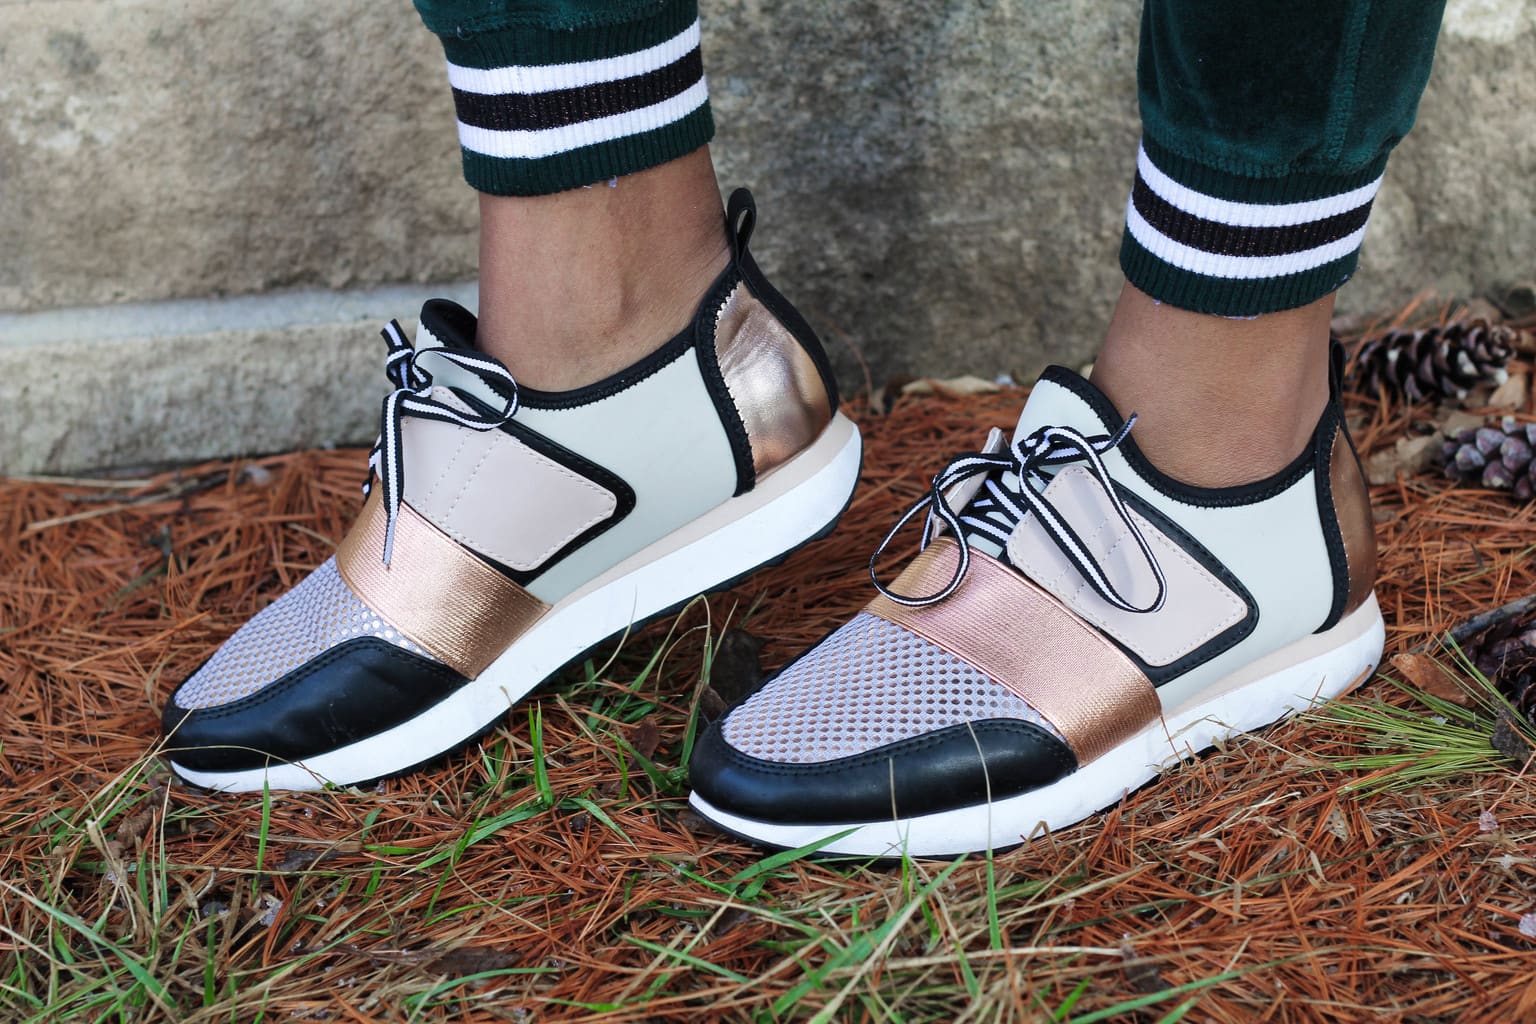 These black, white, and rosegold sneakers are extra trendy and fashionable, especially when paired with her emerald green velour jogger pants.